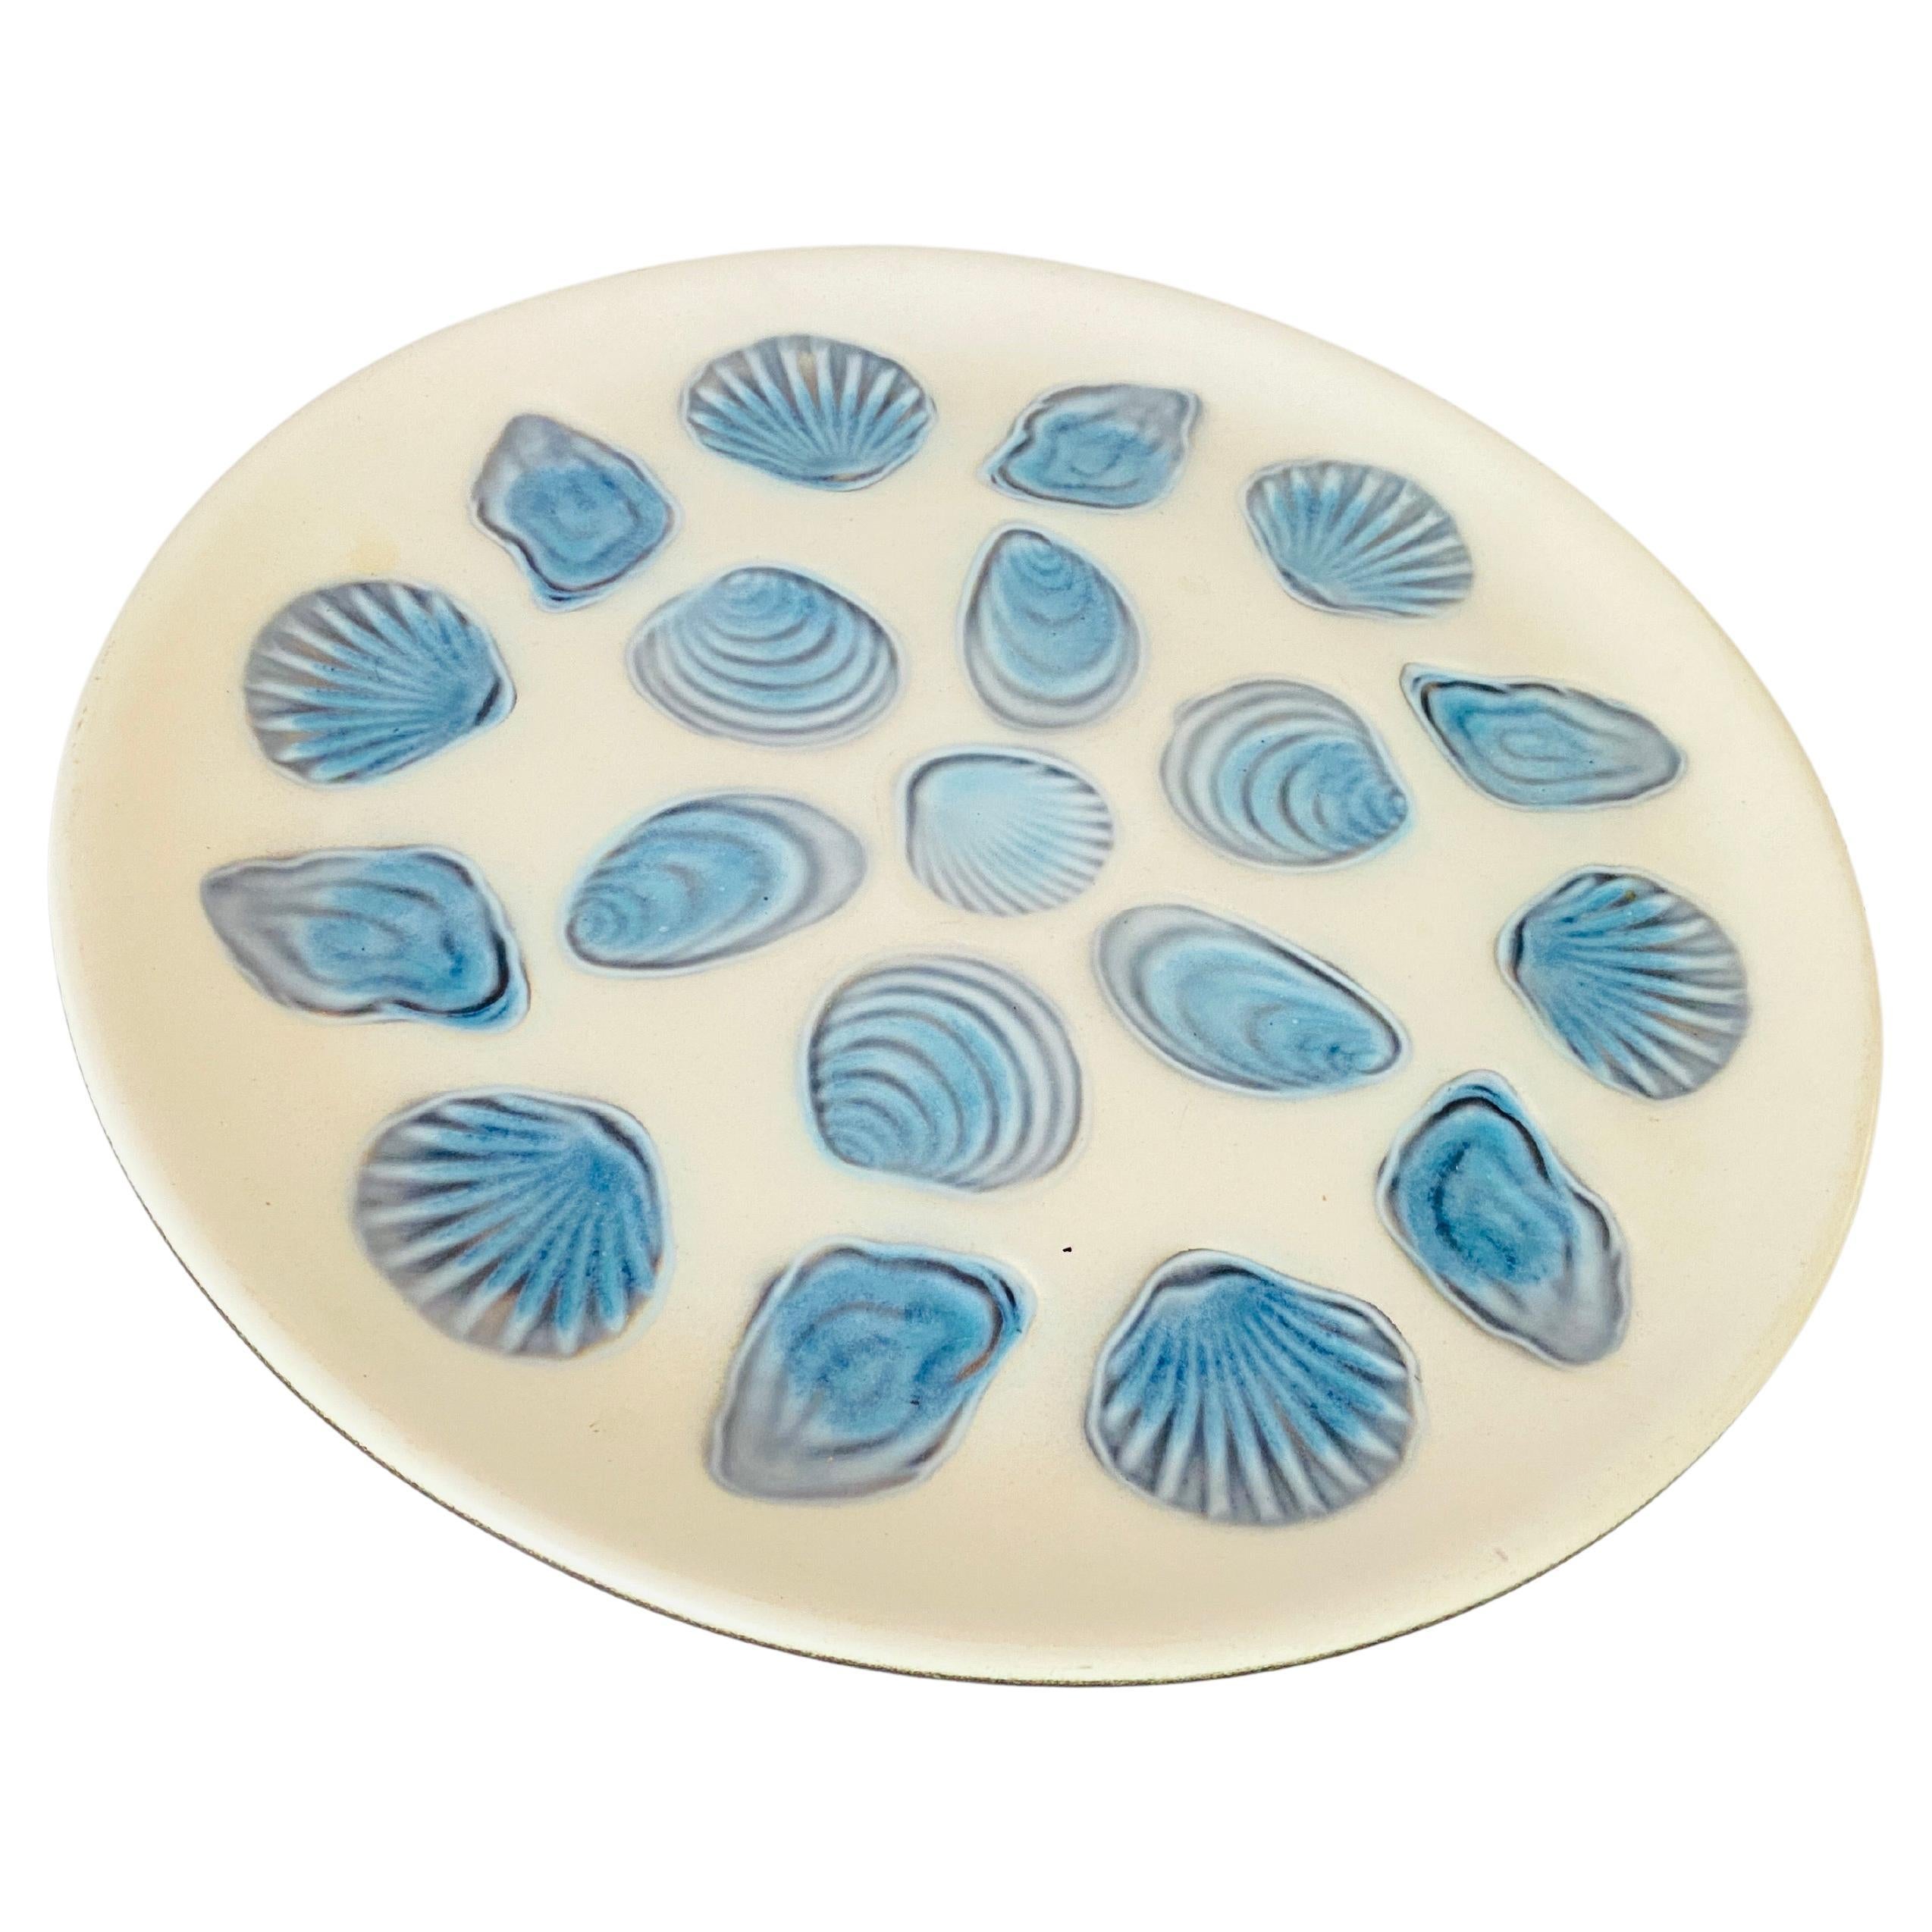 Large Oyster Plate in Ceramic Blue and White Color, 1960 France by Elchinger For Sale